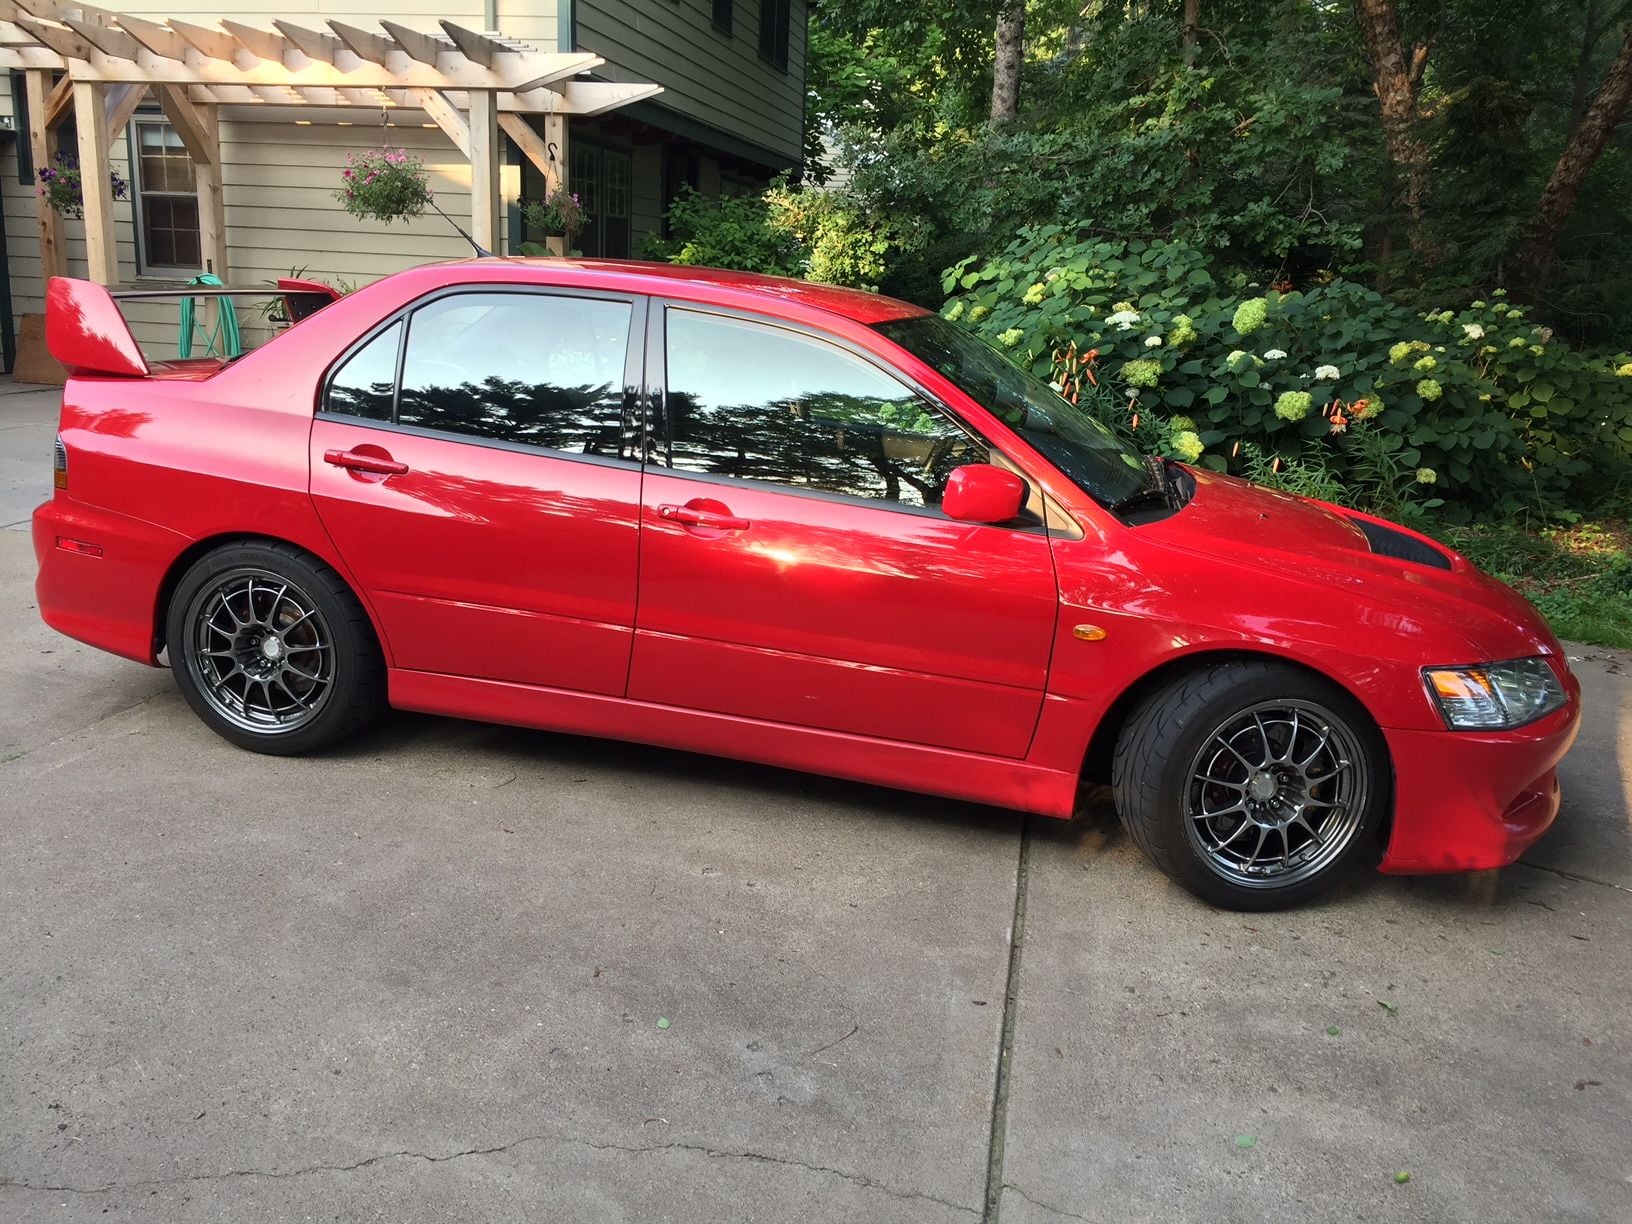 2003 Mitsubishi Lancer Evolution - Evo 8 in Excellent Condition - Used - VIN JA3AH86F73U090007 - 43,600 Miles - 4 cyl - AWD - Manual - Sedan - Red - St. Paul, MN 55110, United States